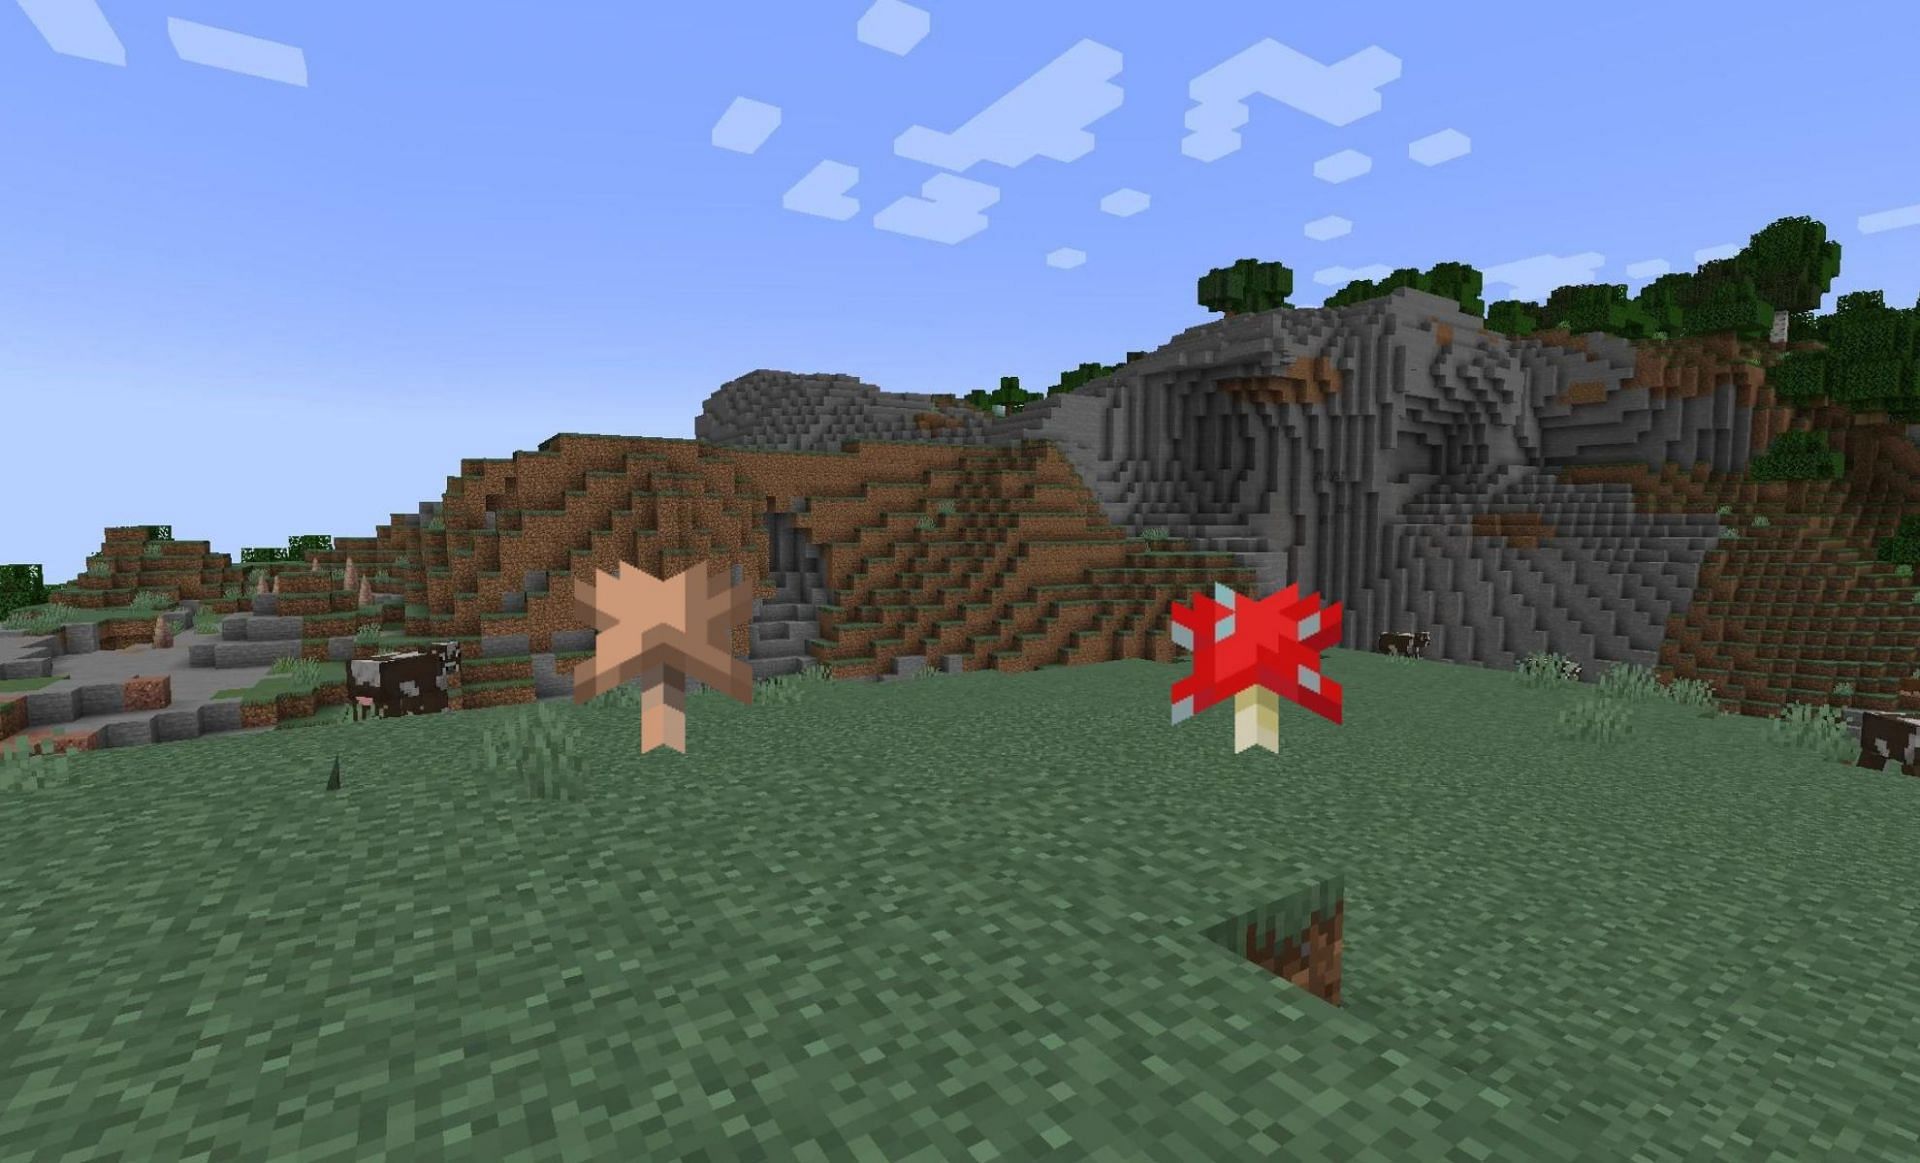 Mushrooms are brown and red (Image via Minecraft Wiki)